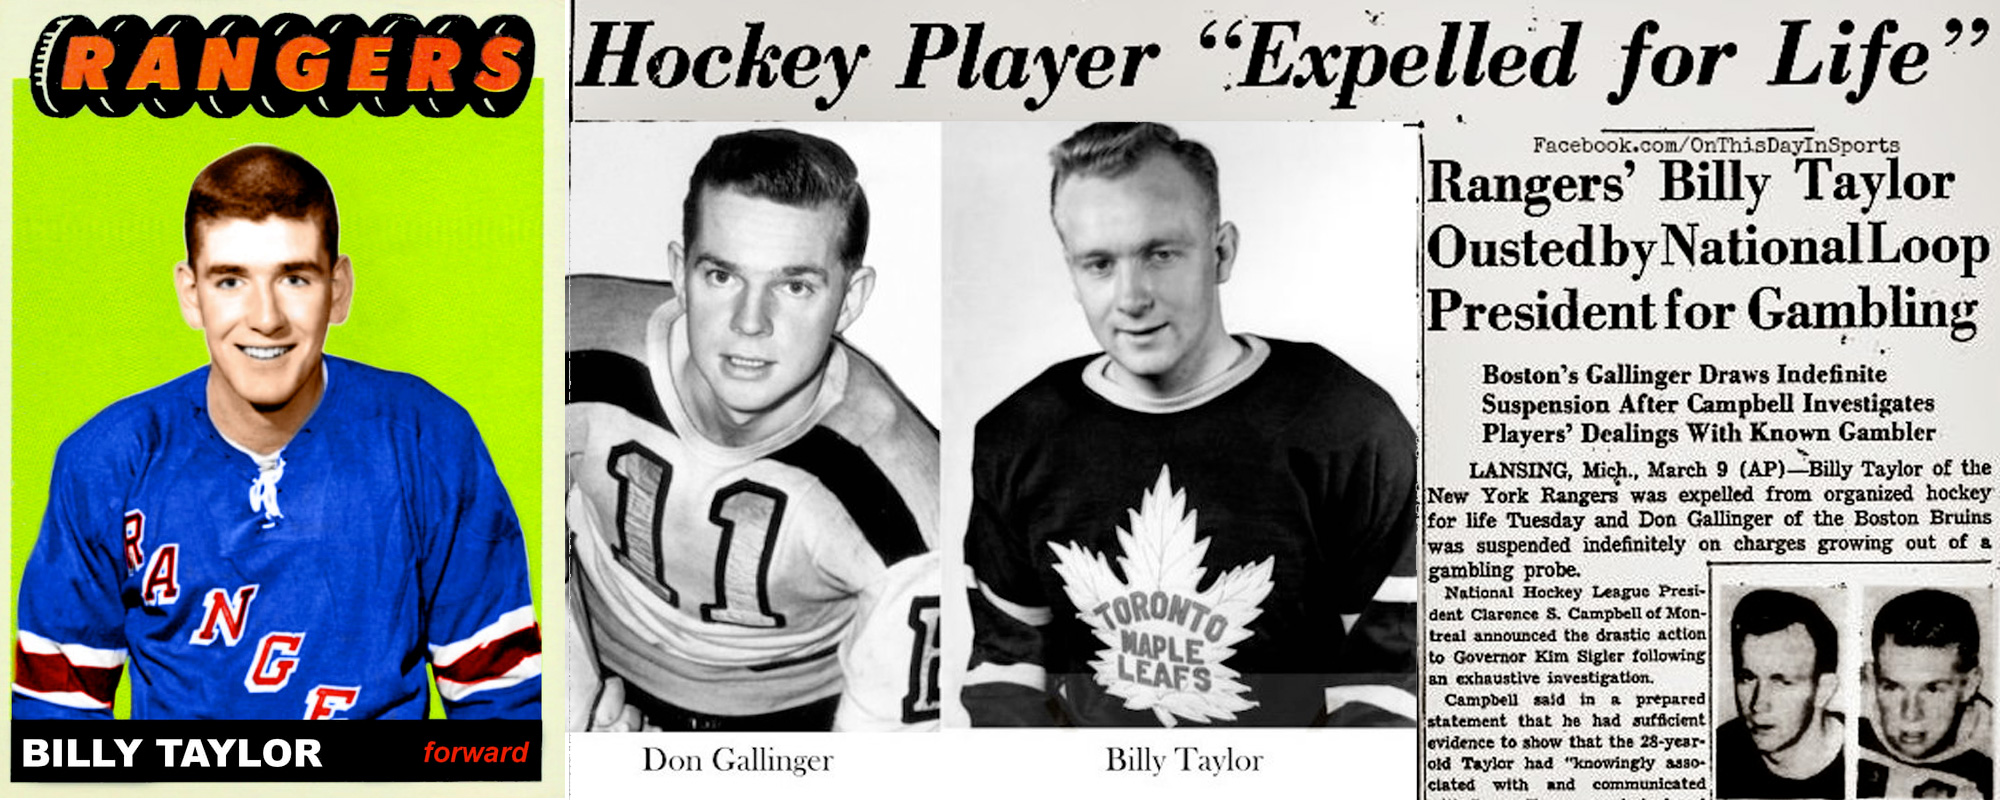 Hockey History: When the NHL Cracked Down on Gambling